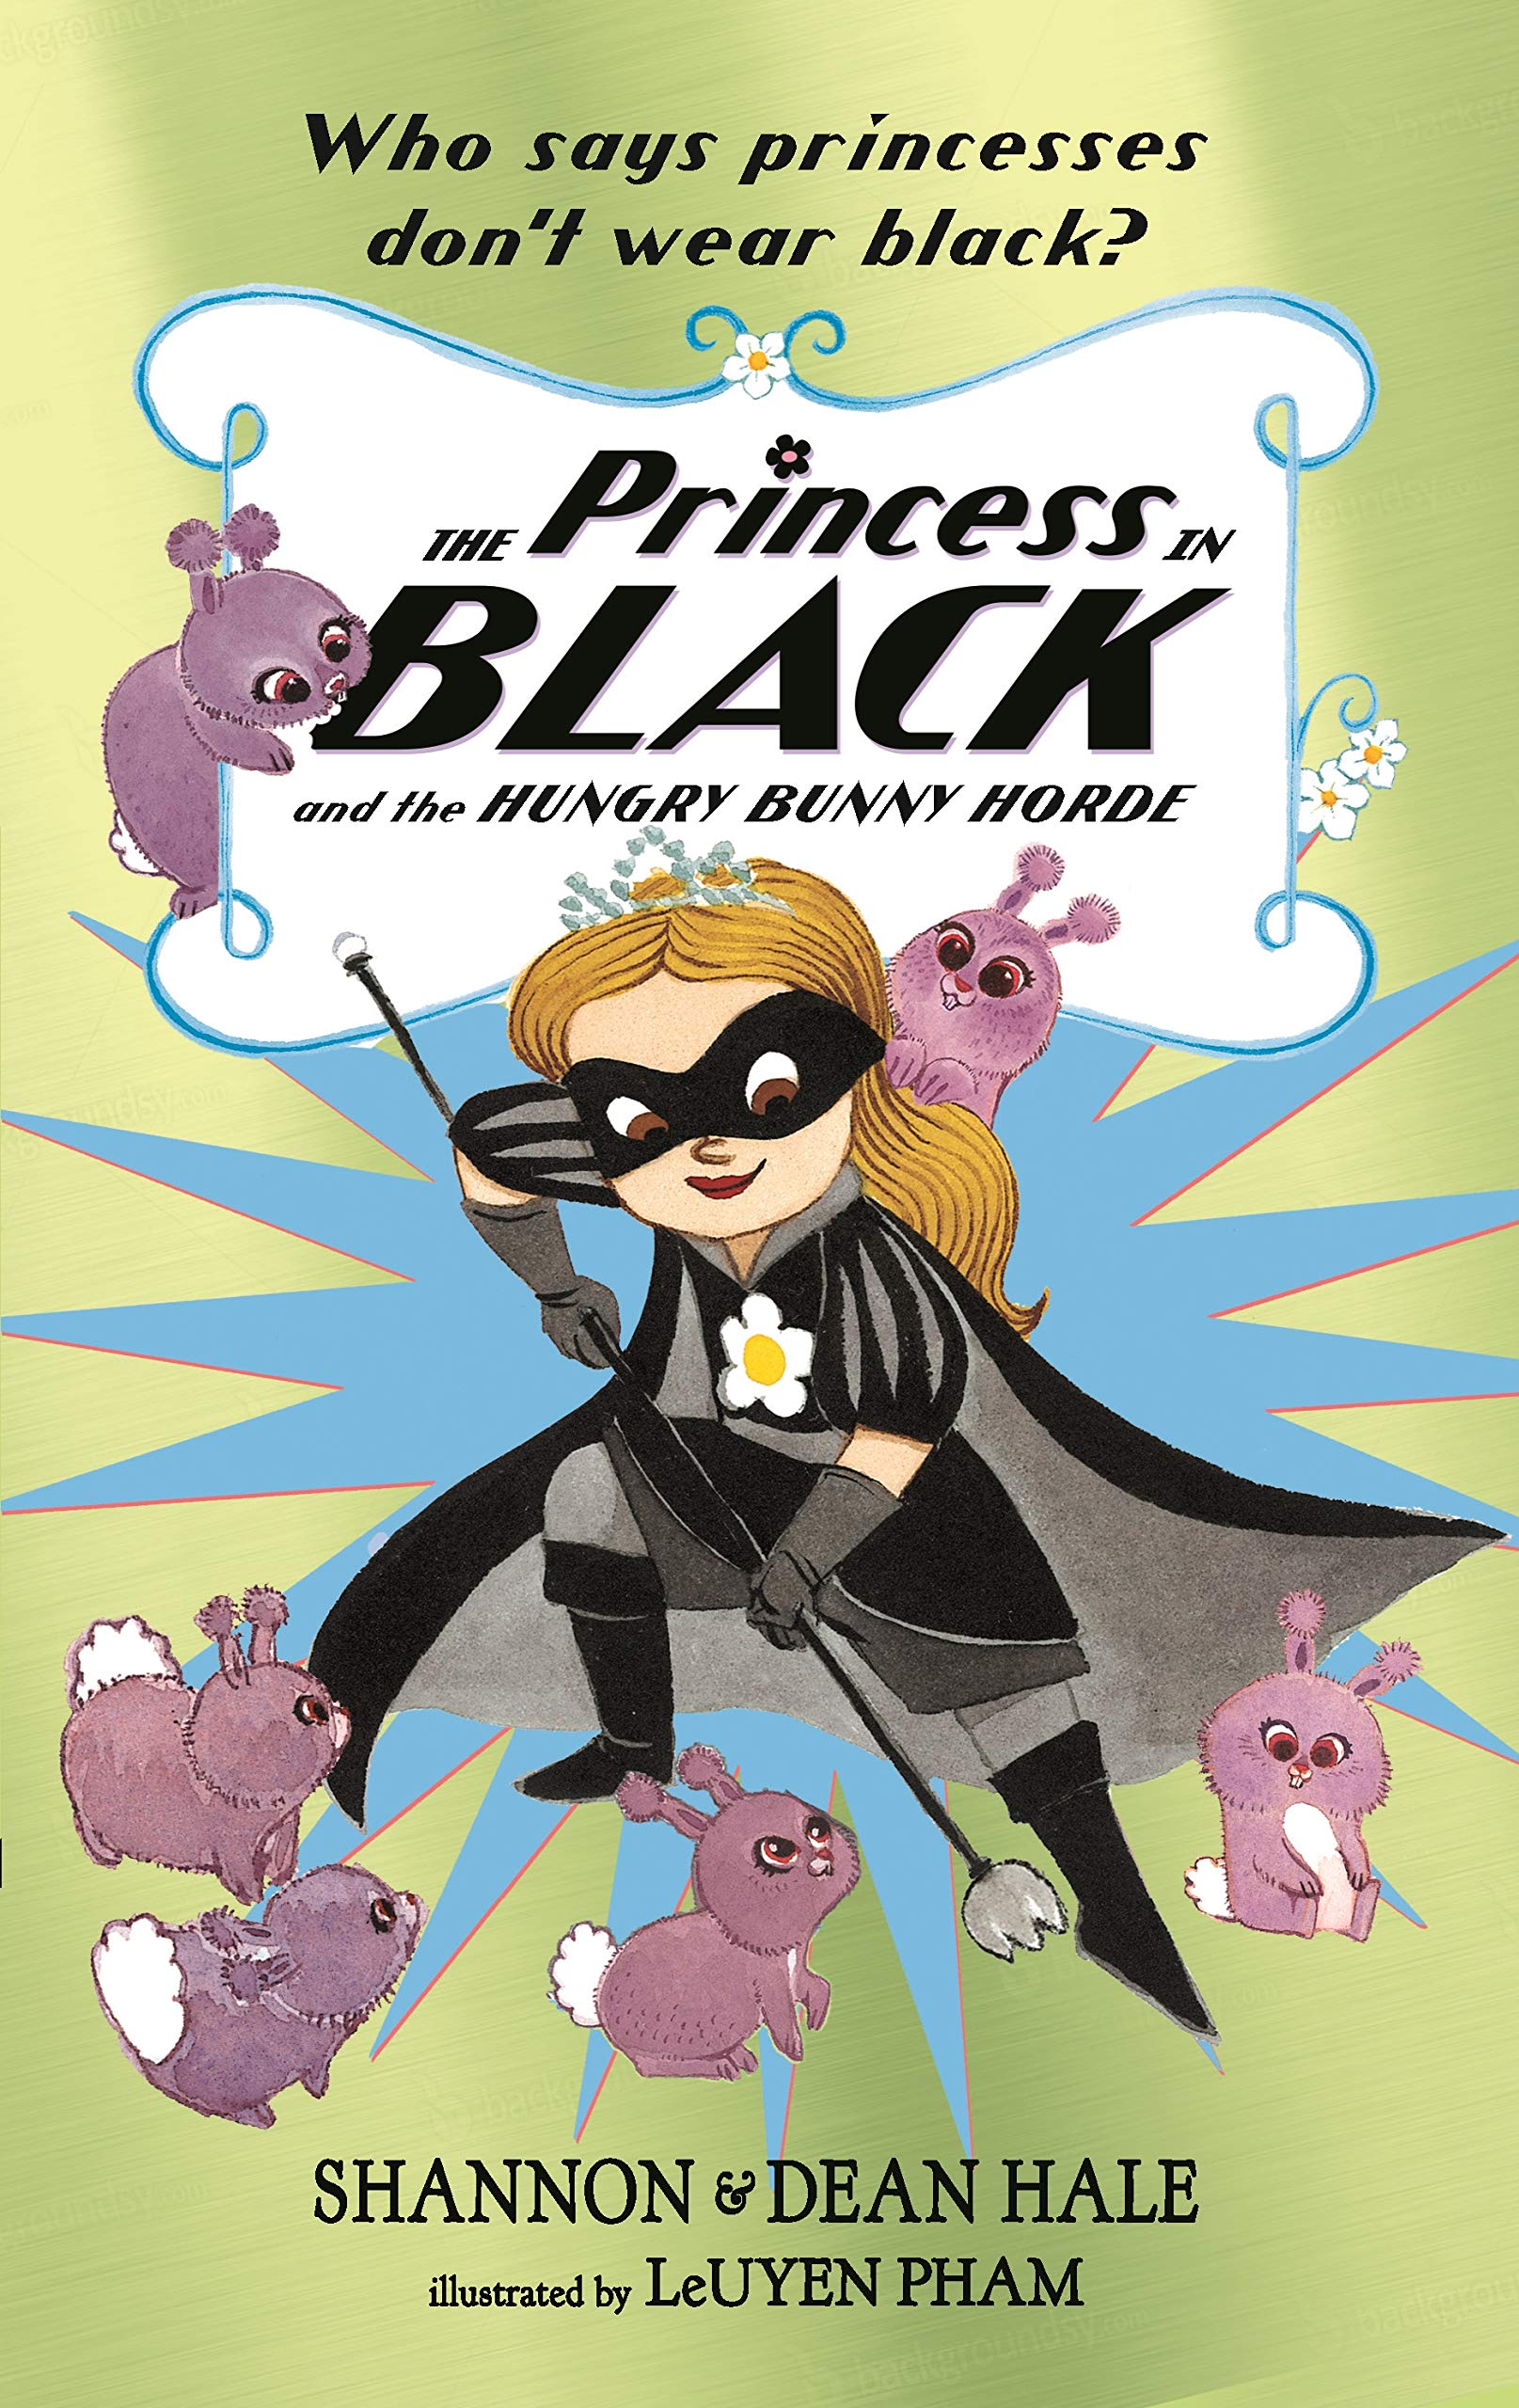 THE BLACK PRINCESS IN BLACK AND THE HUNGRY BUNNY HORDE